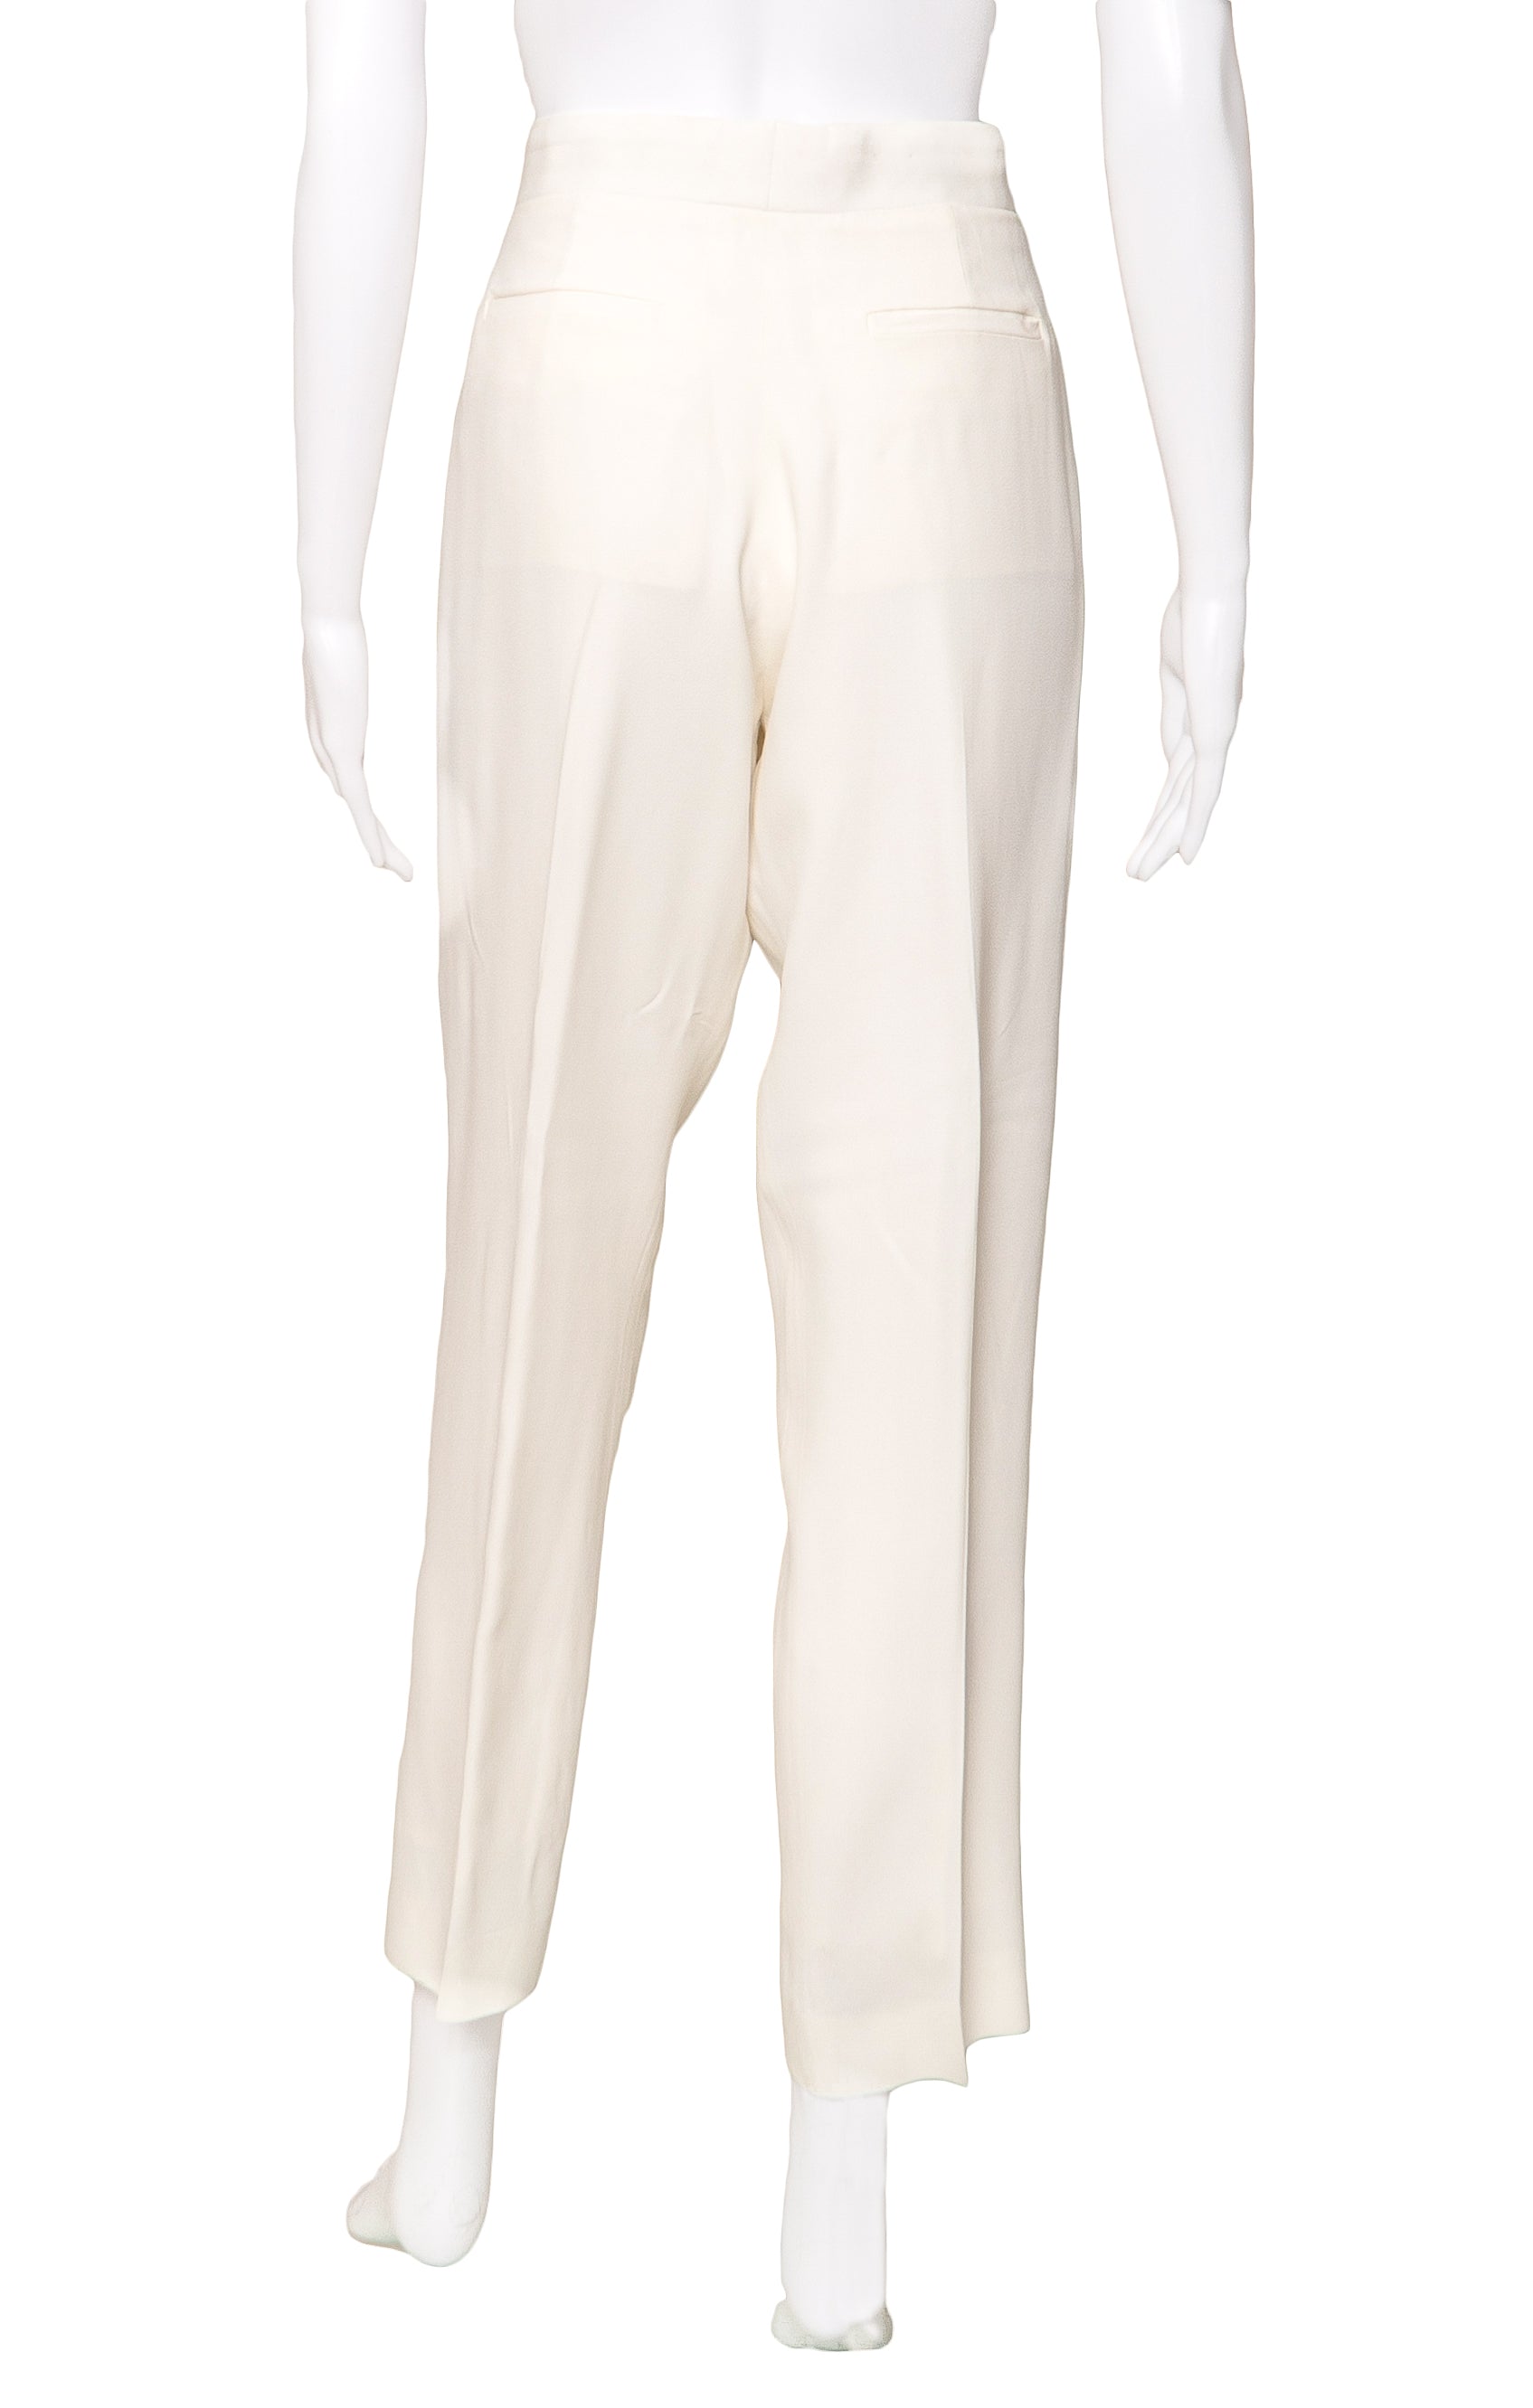 CHLOÉ Pants Size: FR 42 (comparable to US 8-10)